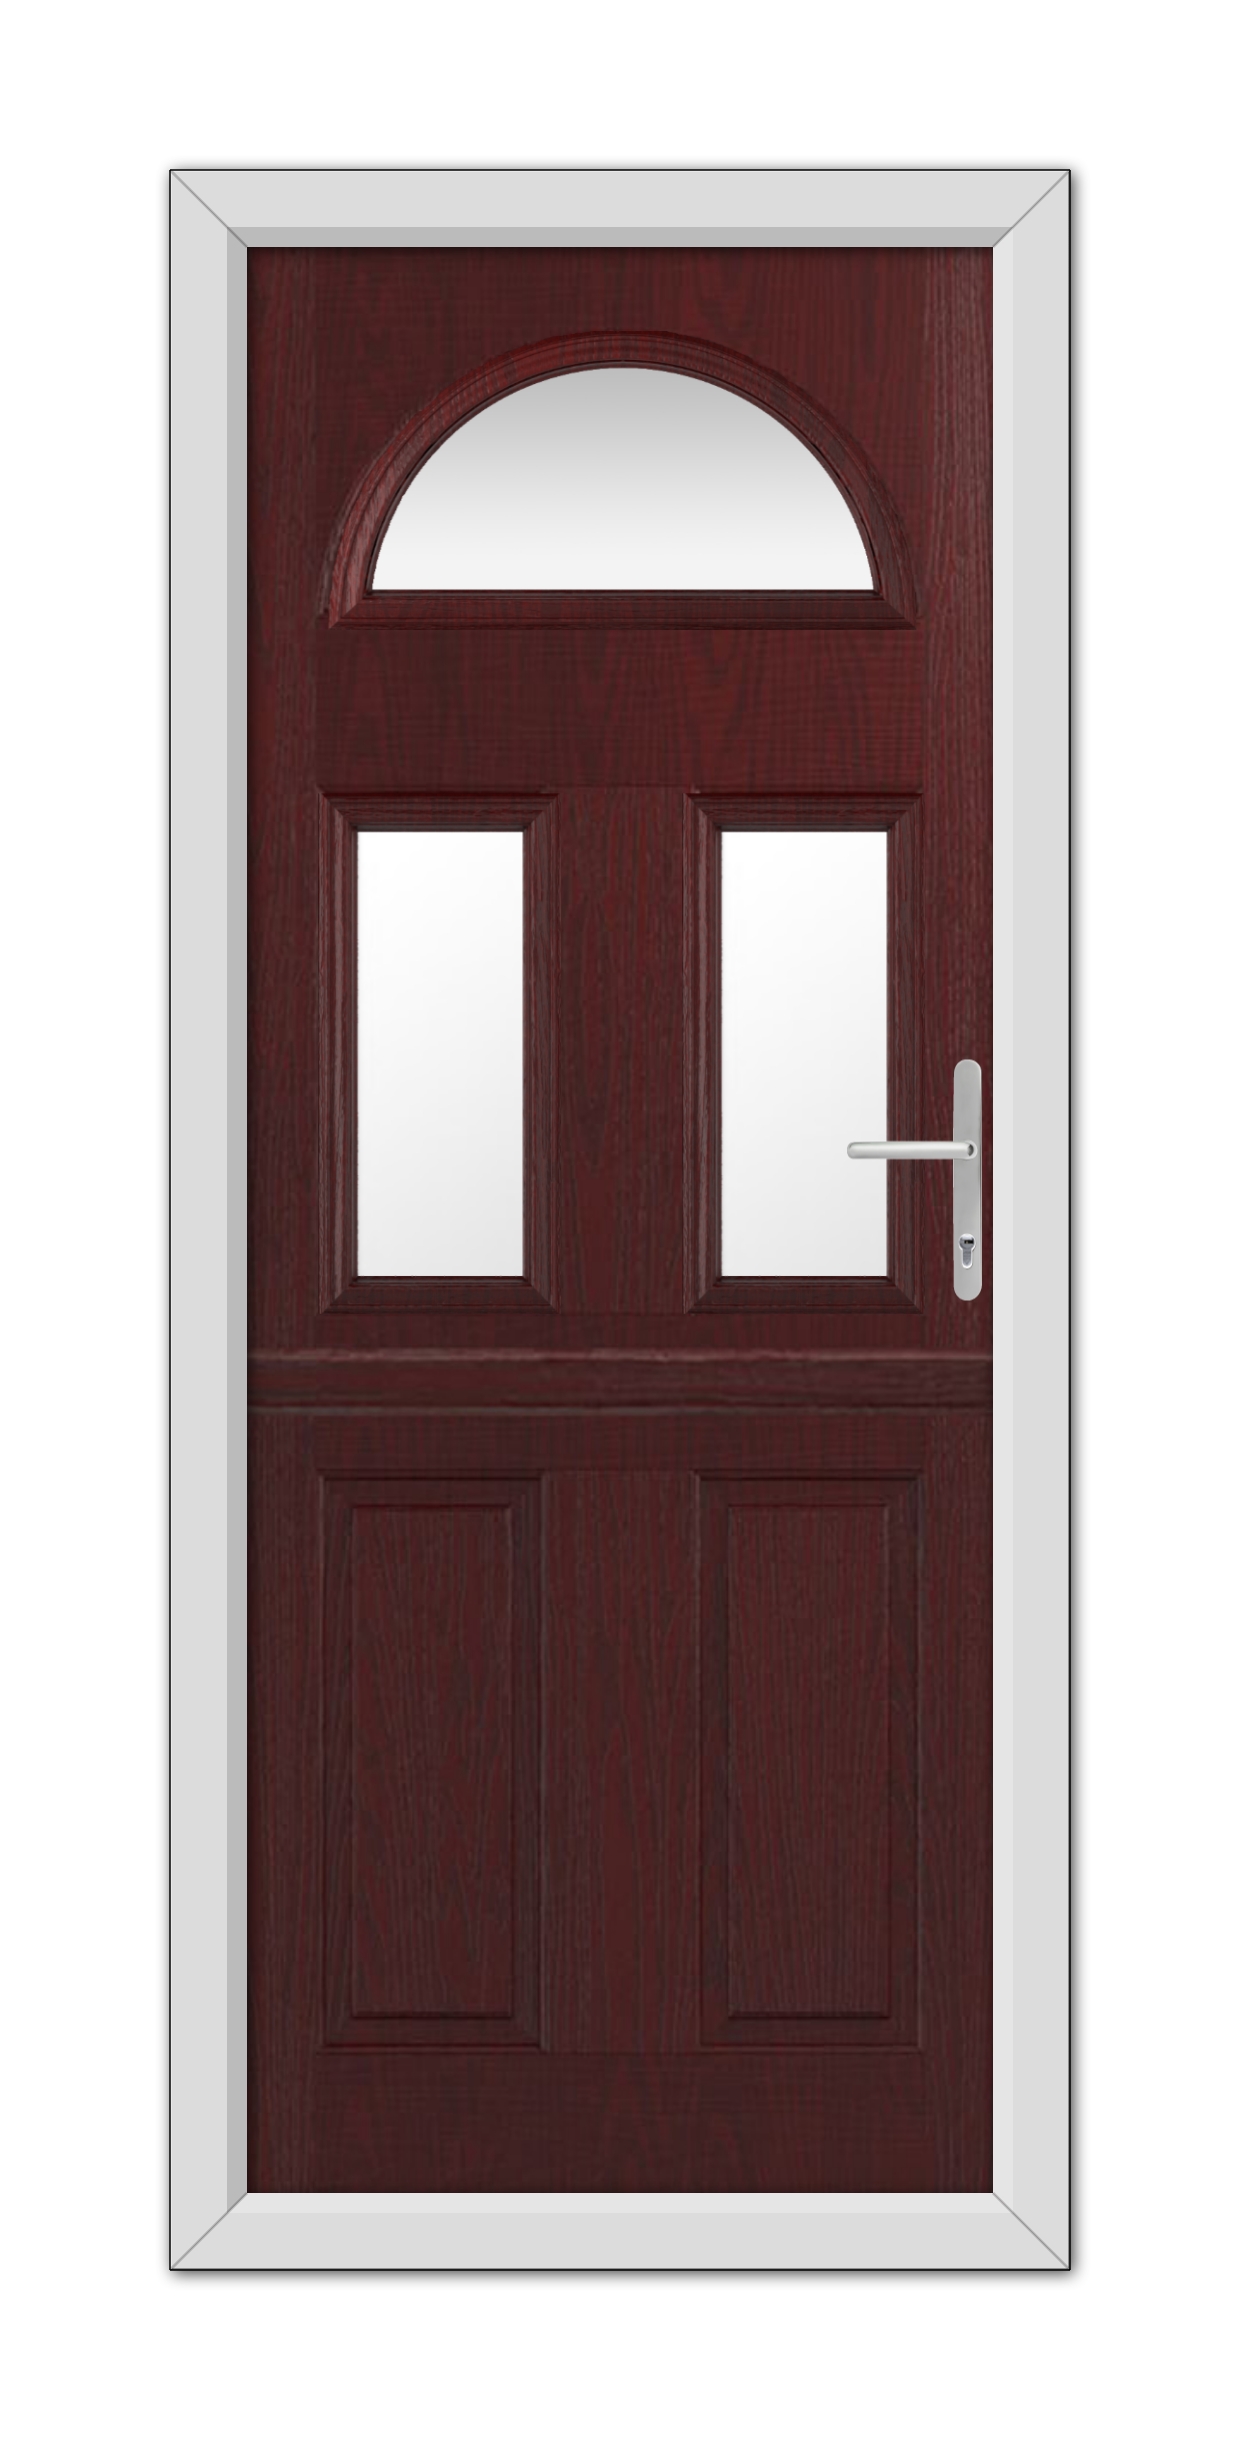 A Rosewood Winslow 3 Stable Composite Door 48mm Timber Core with an arched window at the top, set within a white frame, featuring a modern handle on the right side.